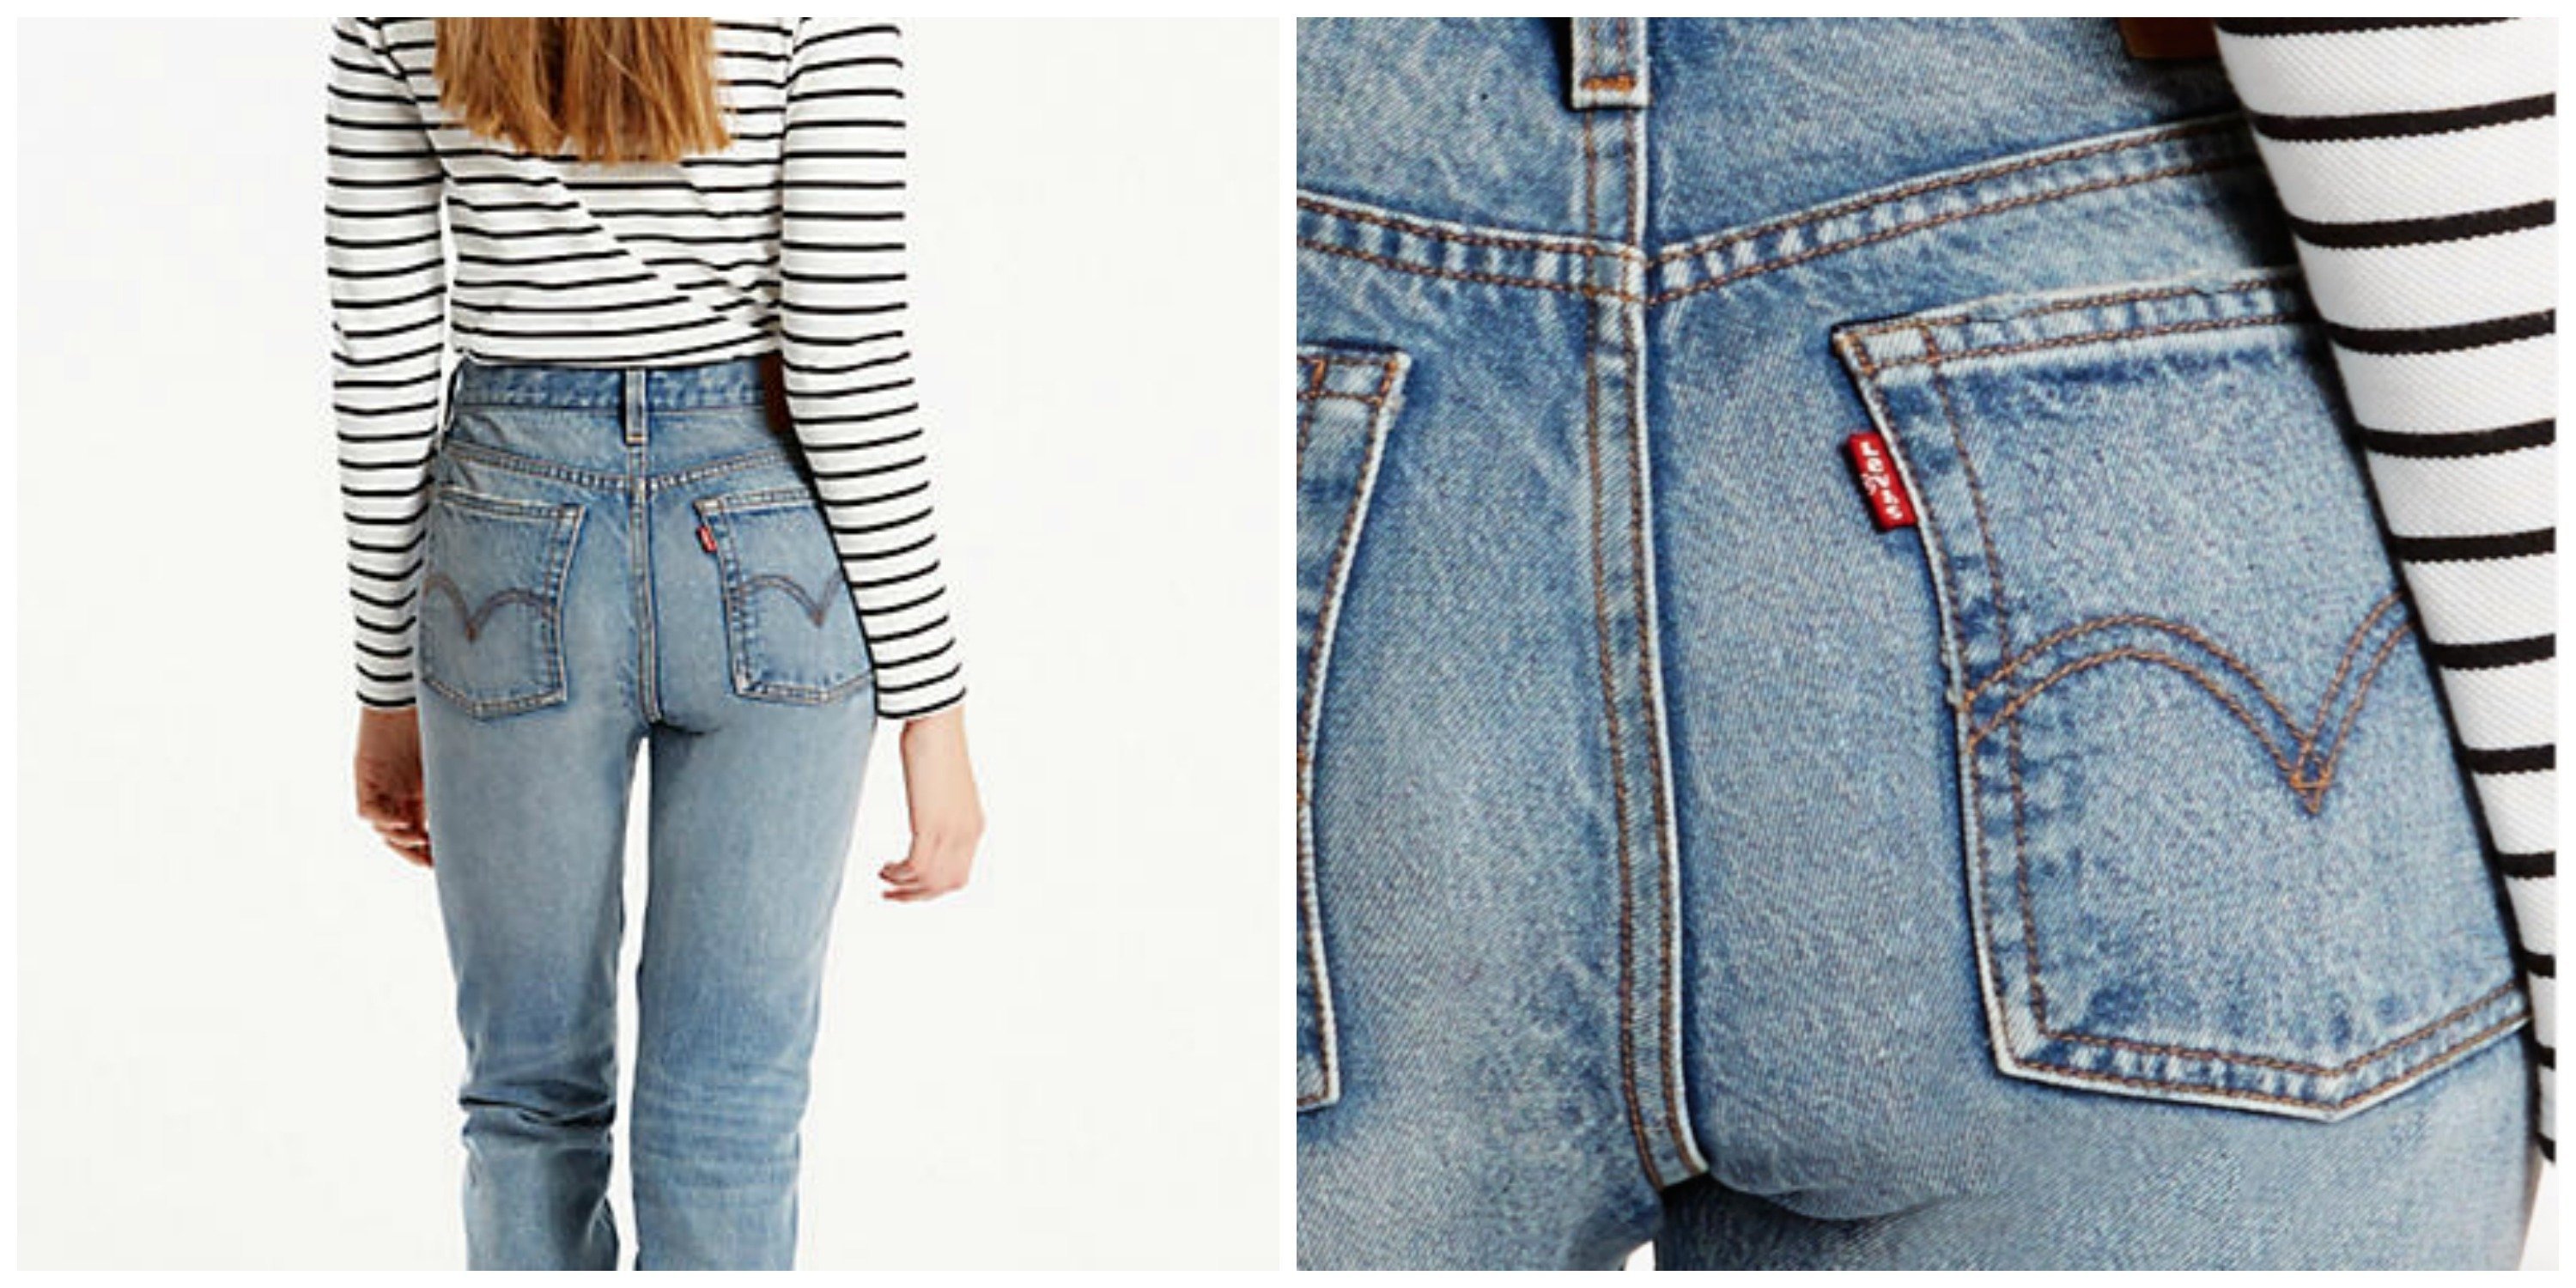 Wedgie Fit' Jeans Promise To Lift 